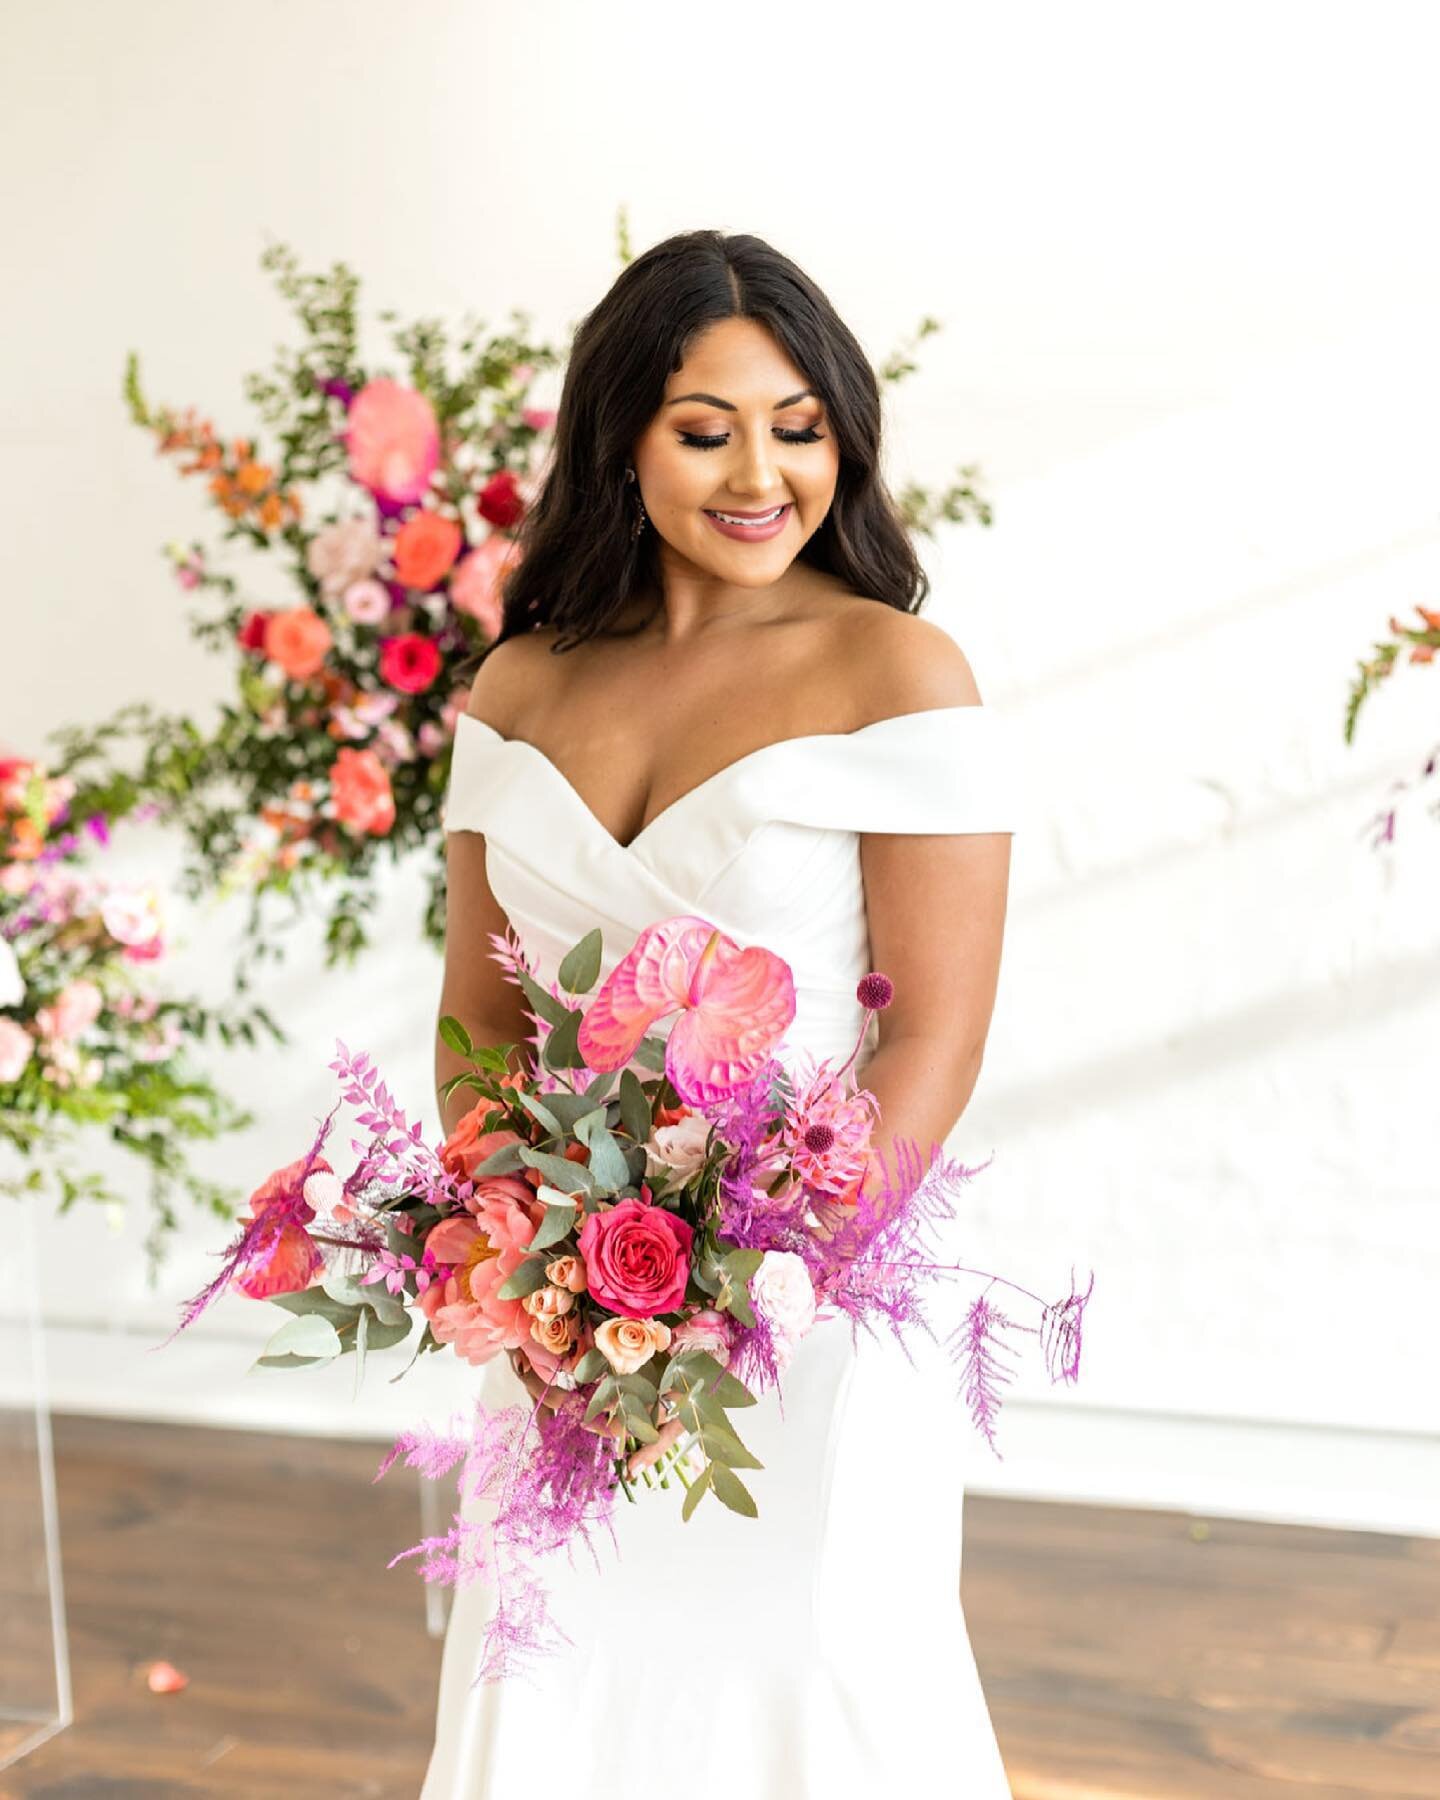 The pink florals 💕😍. I love all of the fun summer color! 

Are you team neutral or colorful when it comes to your wedding day? 

Venue: @schoolhouseevents 
Florist: @behold_floral_design 
HAMU: @grandslamglam 
Bridal salon: @damelebridal 
Jewelry: 